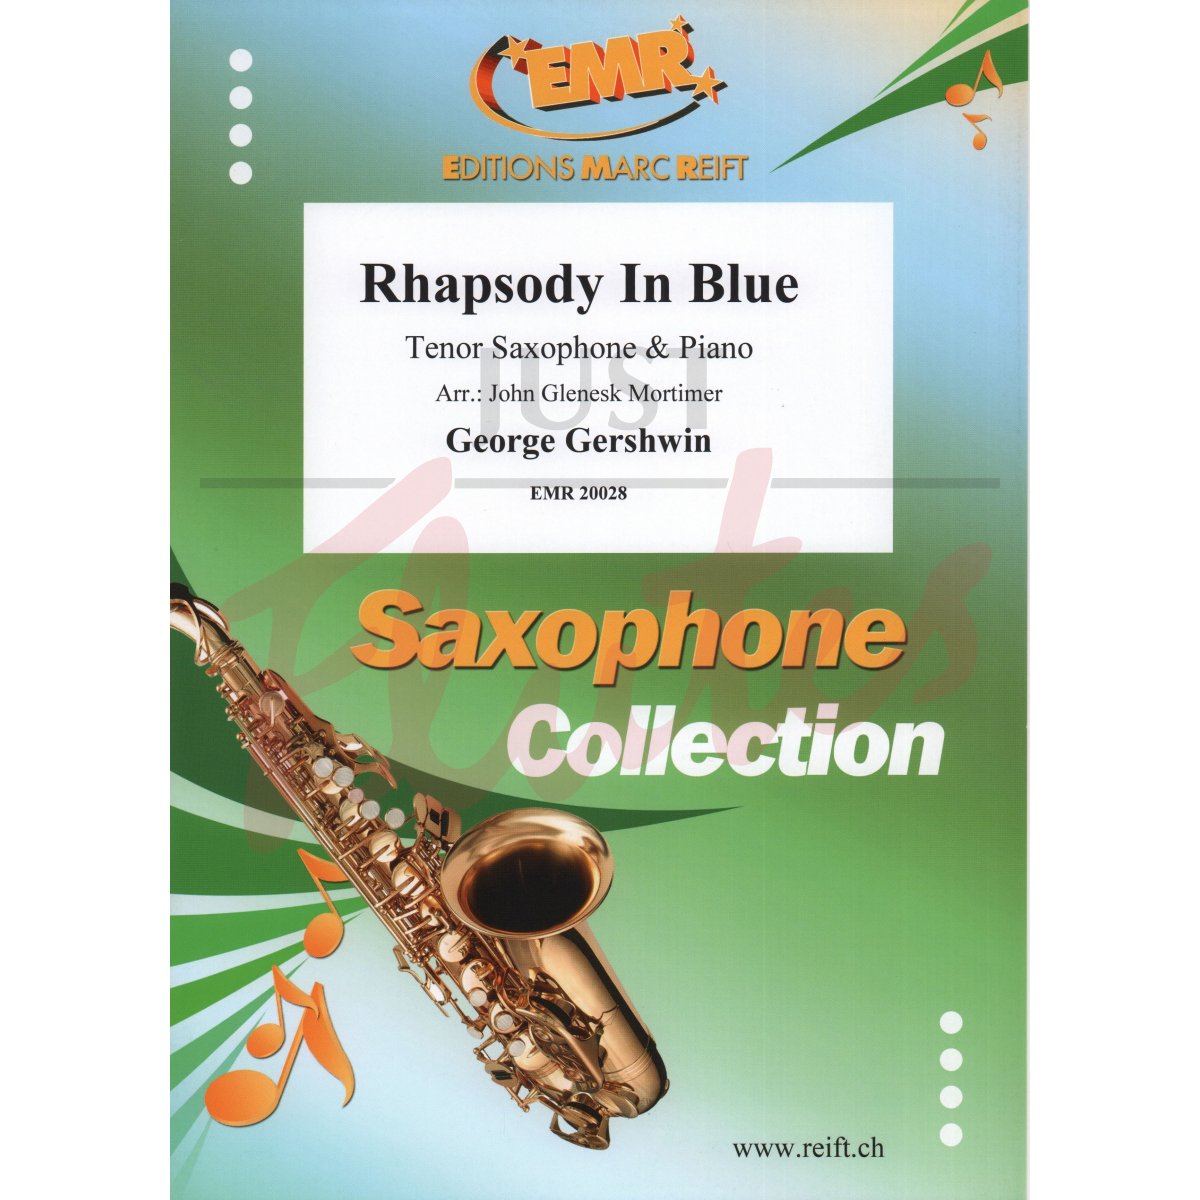 Rhapsody in Blue for Tenor Saxophone and Piano